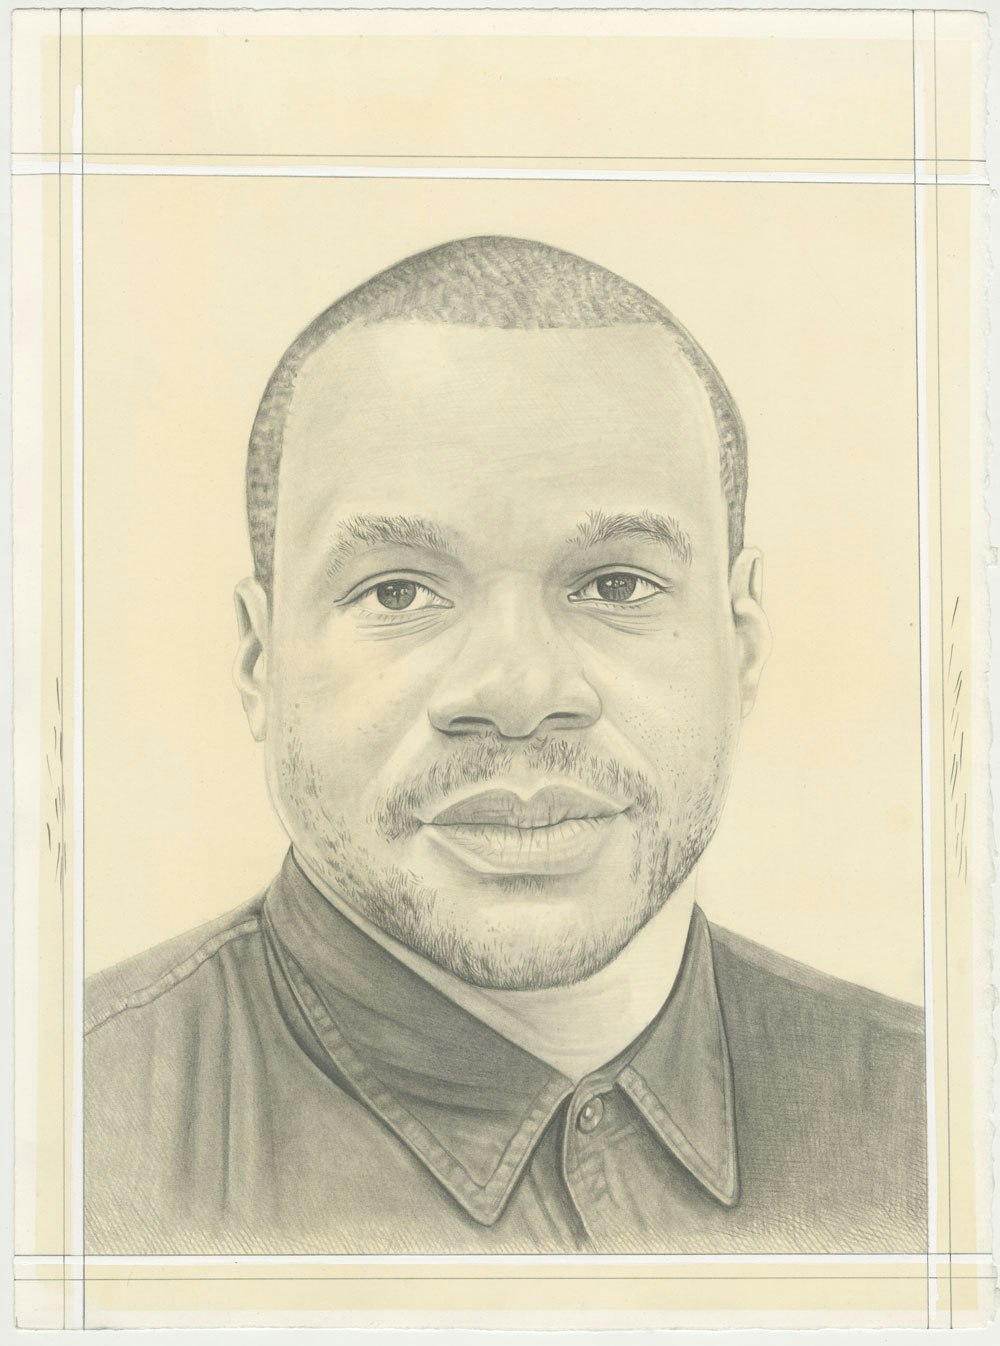 Portrait of Noel Anderson, pencil on paper by Phong H. Bui.